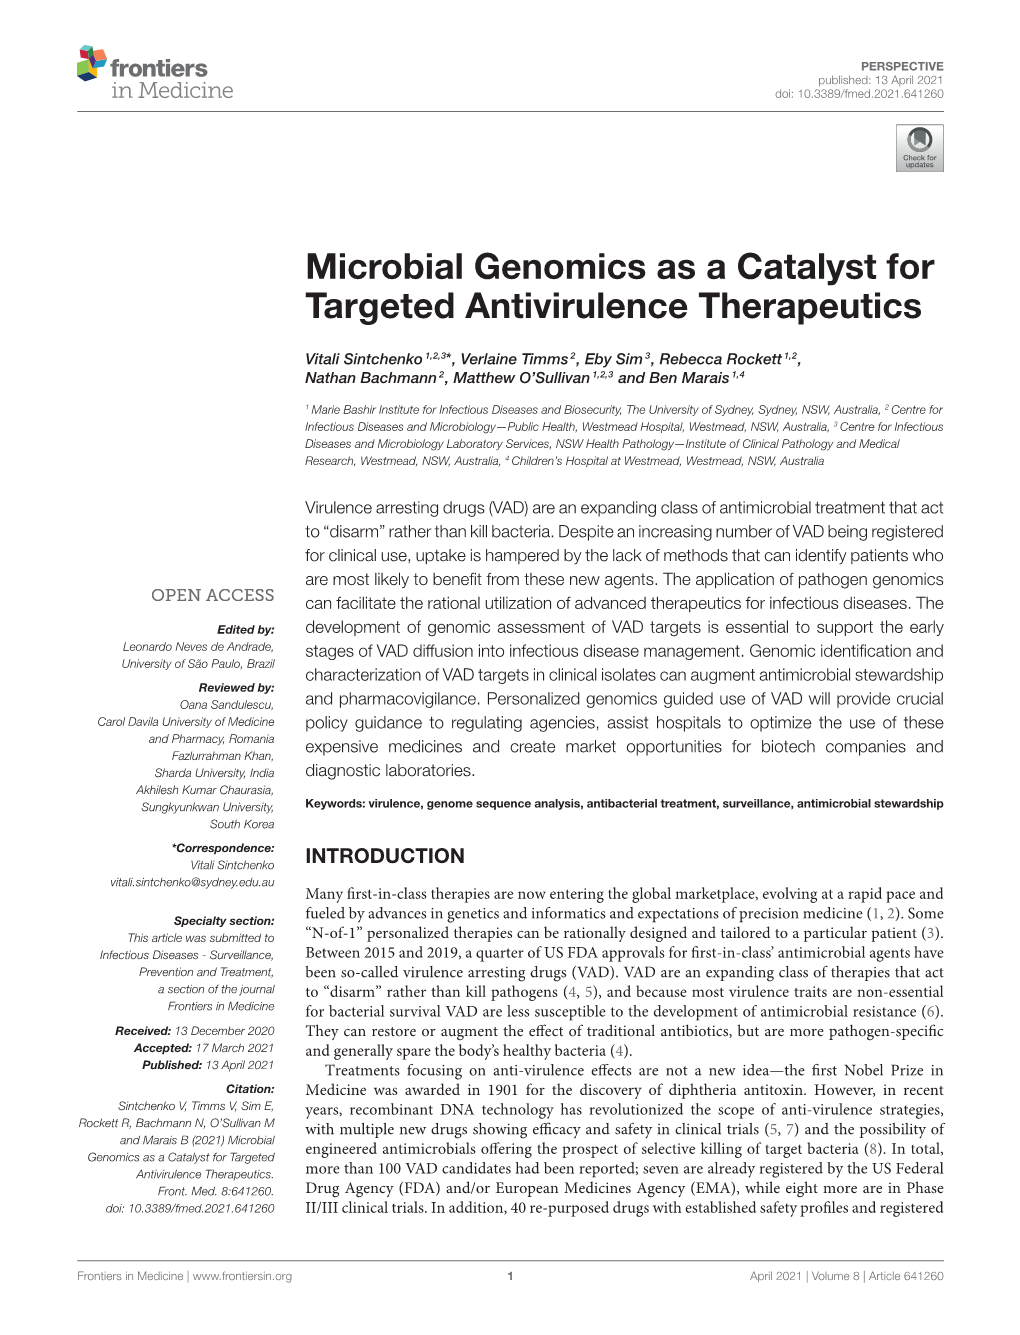 Microbial Genomics As a Catalyst for Targeted Antivirulence Therapeutics